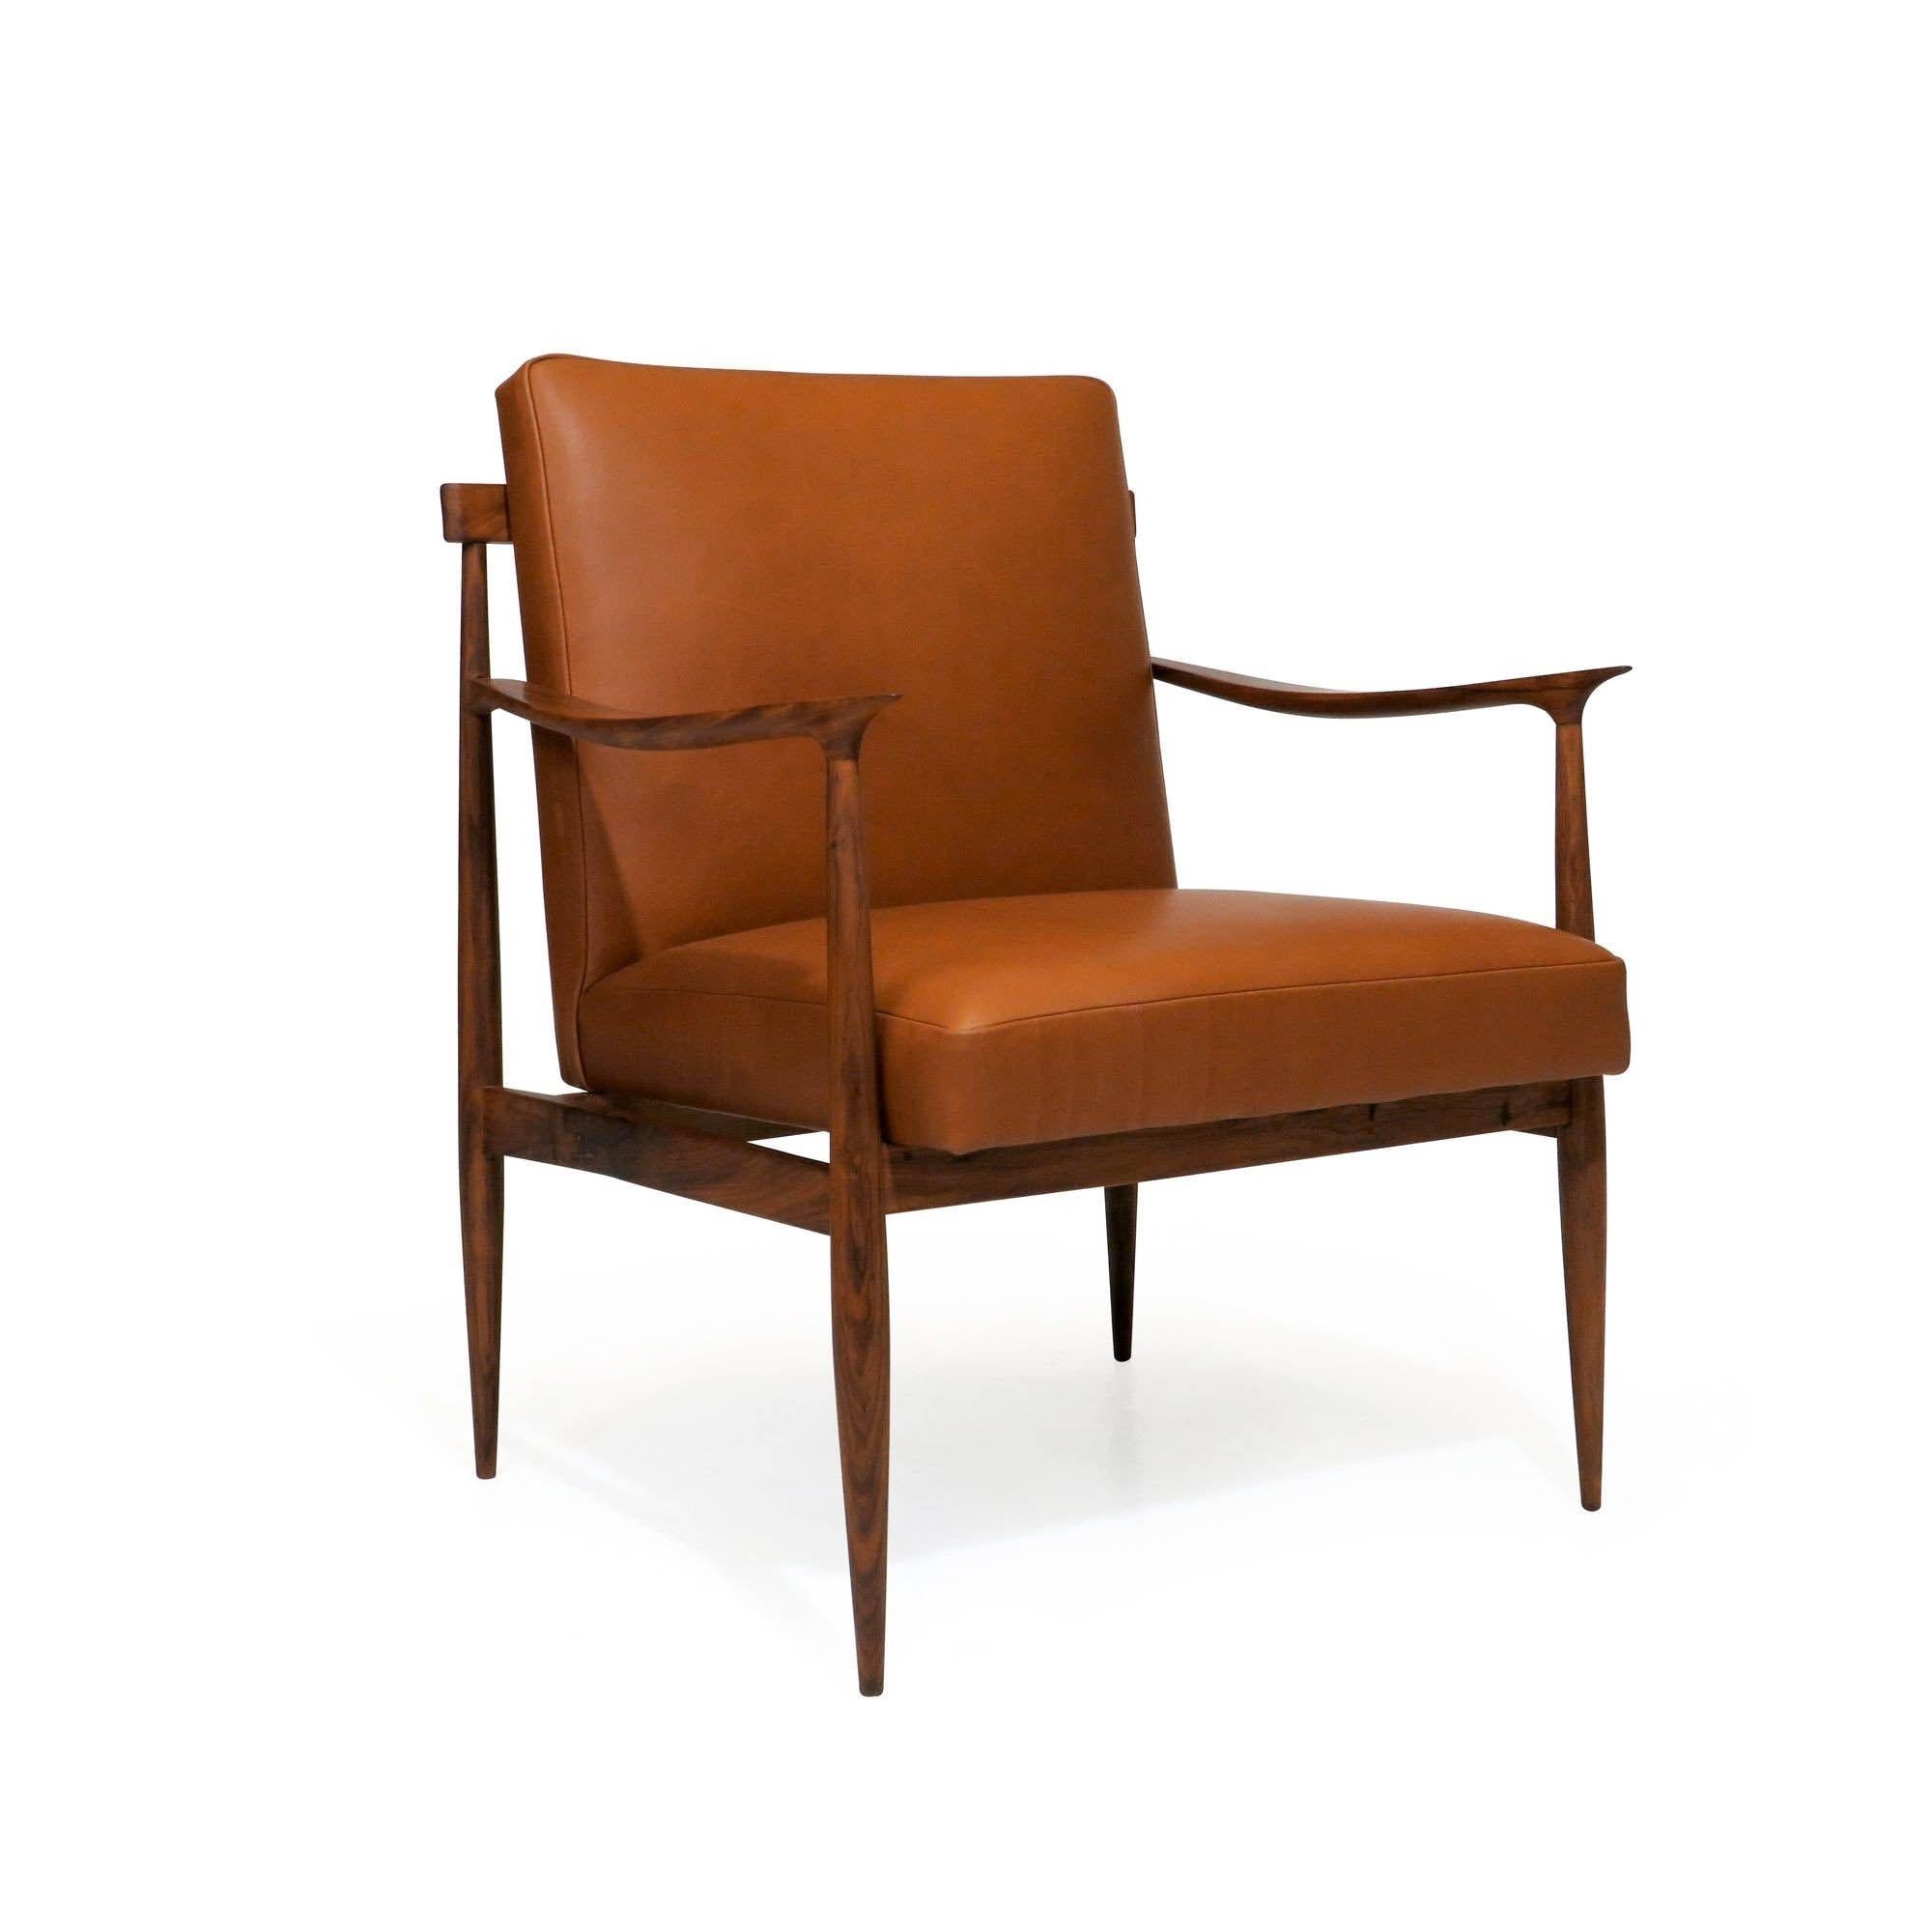 Giuseppe Scapinelli lounge chair handcrafted from solid caviuna in a sculptural form with sloping arms and tapered edges; and upholstered in a full-aniline dyed leather with an extremely soft feel. This elegant Brazilian modern lounge chair has been